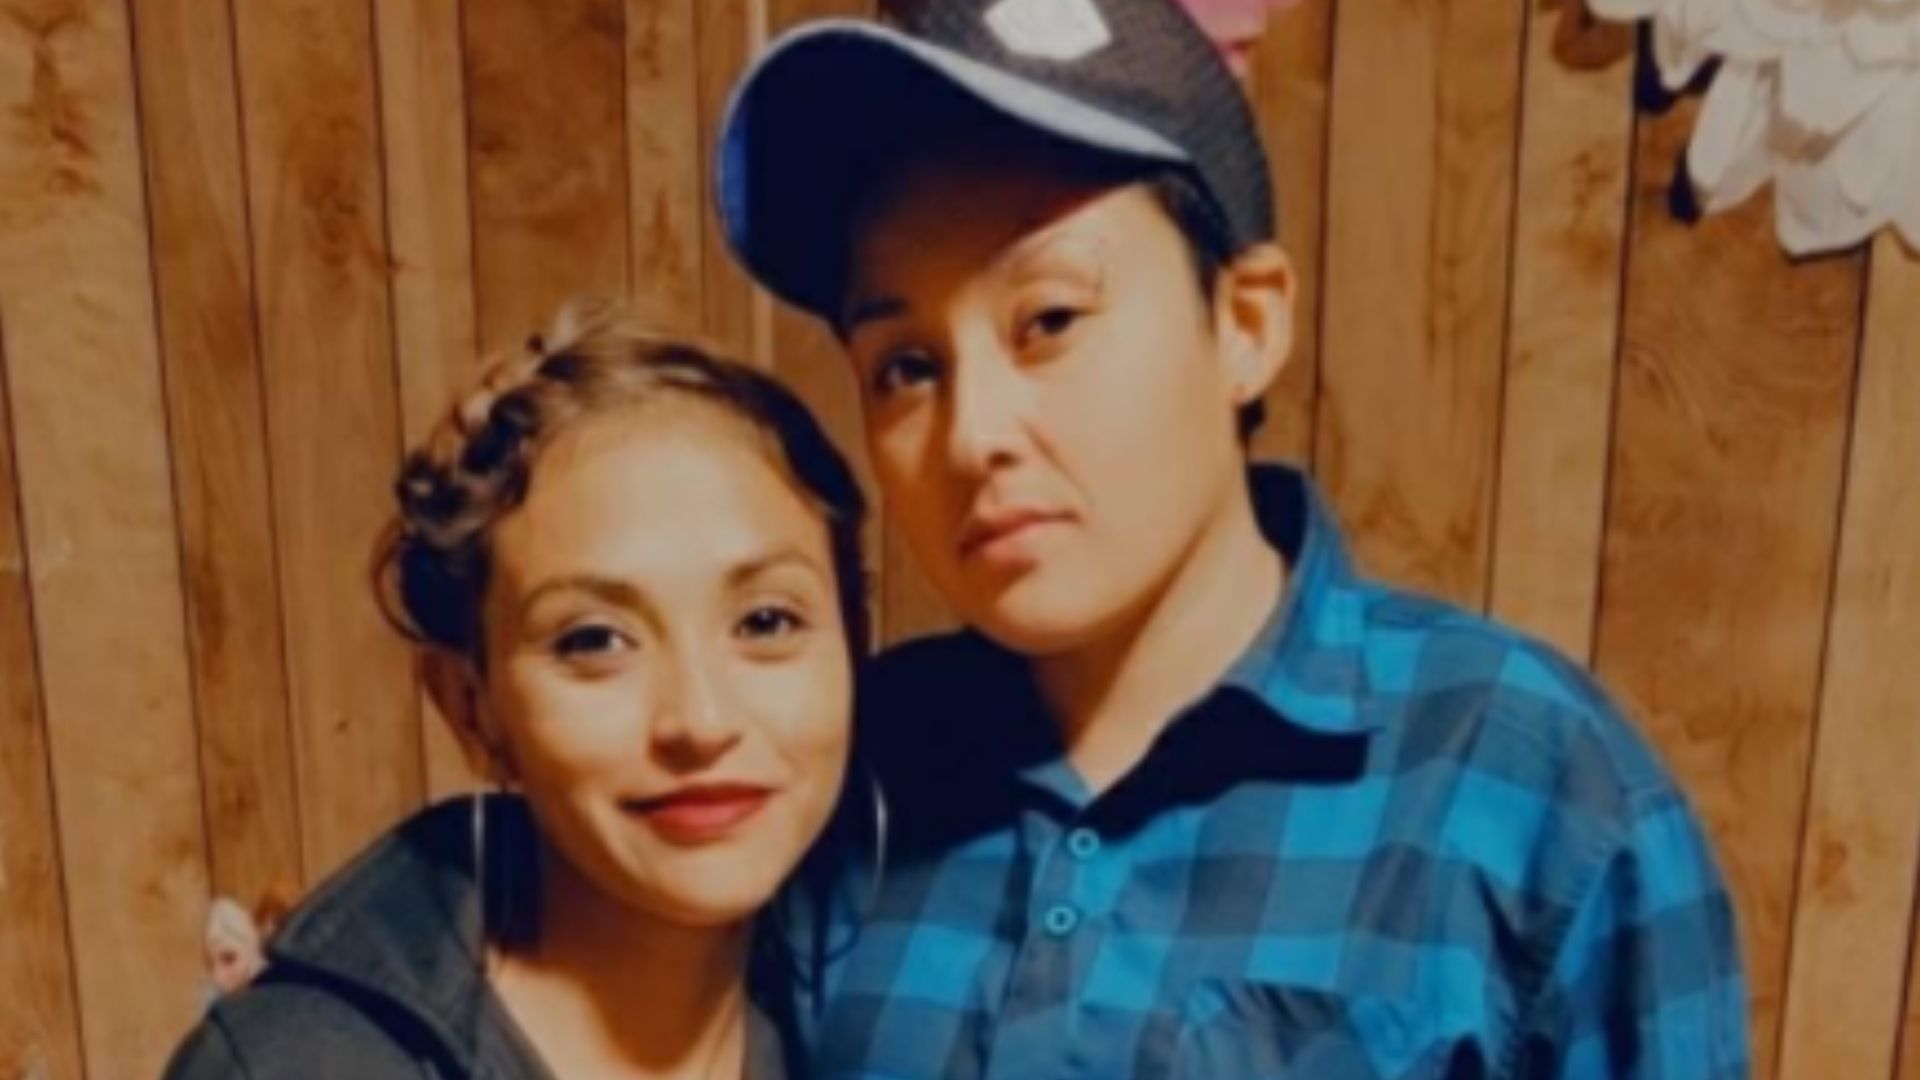 Julissa Ramírez and Nohemí Medina martinez, a queer Mexican couple who were murdered on January 15.